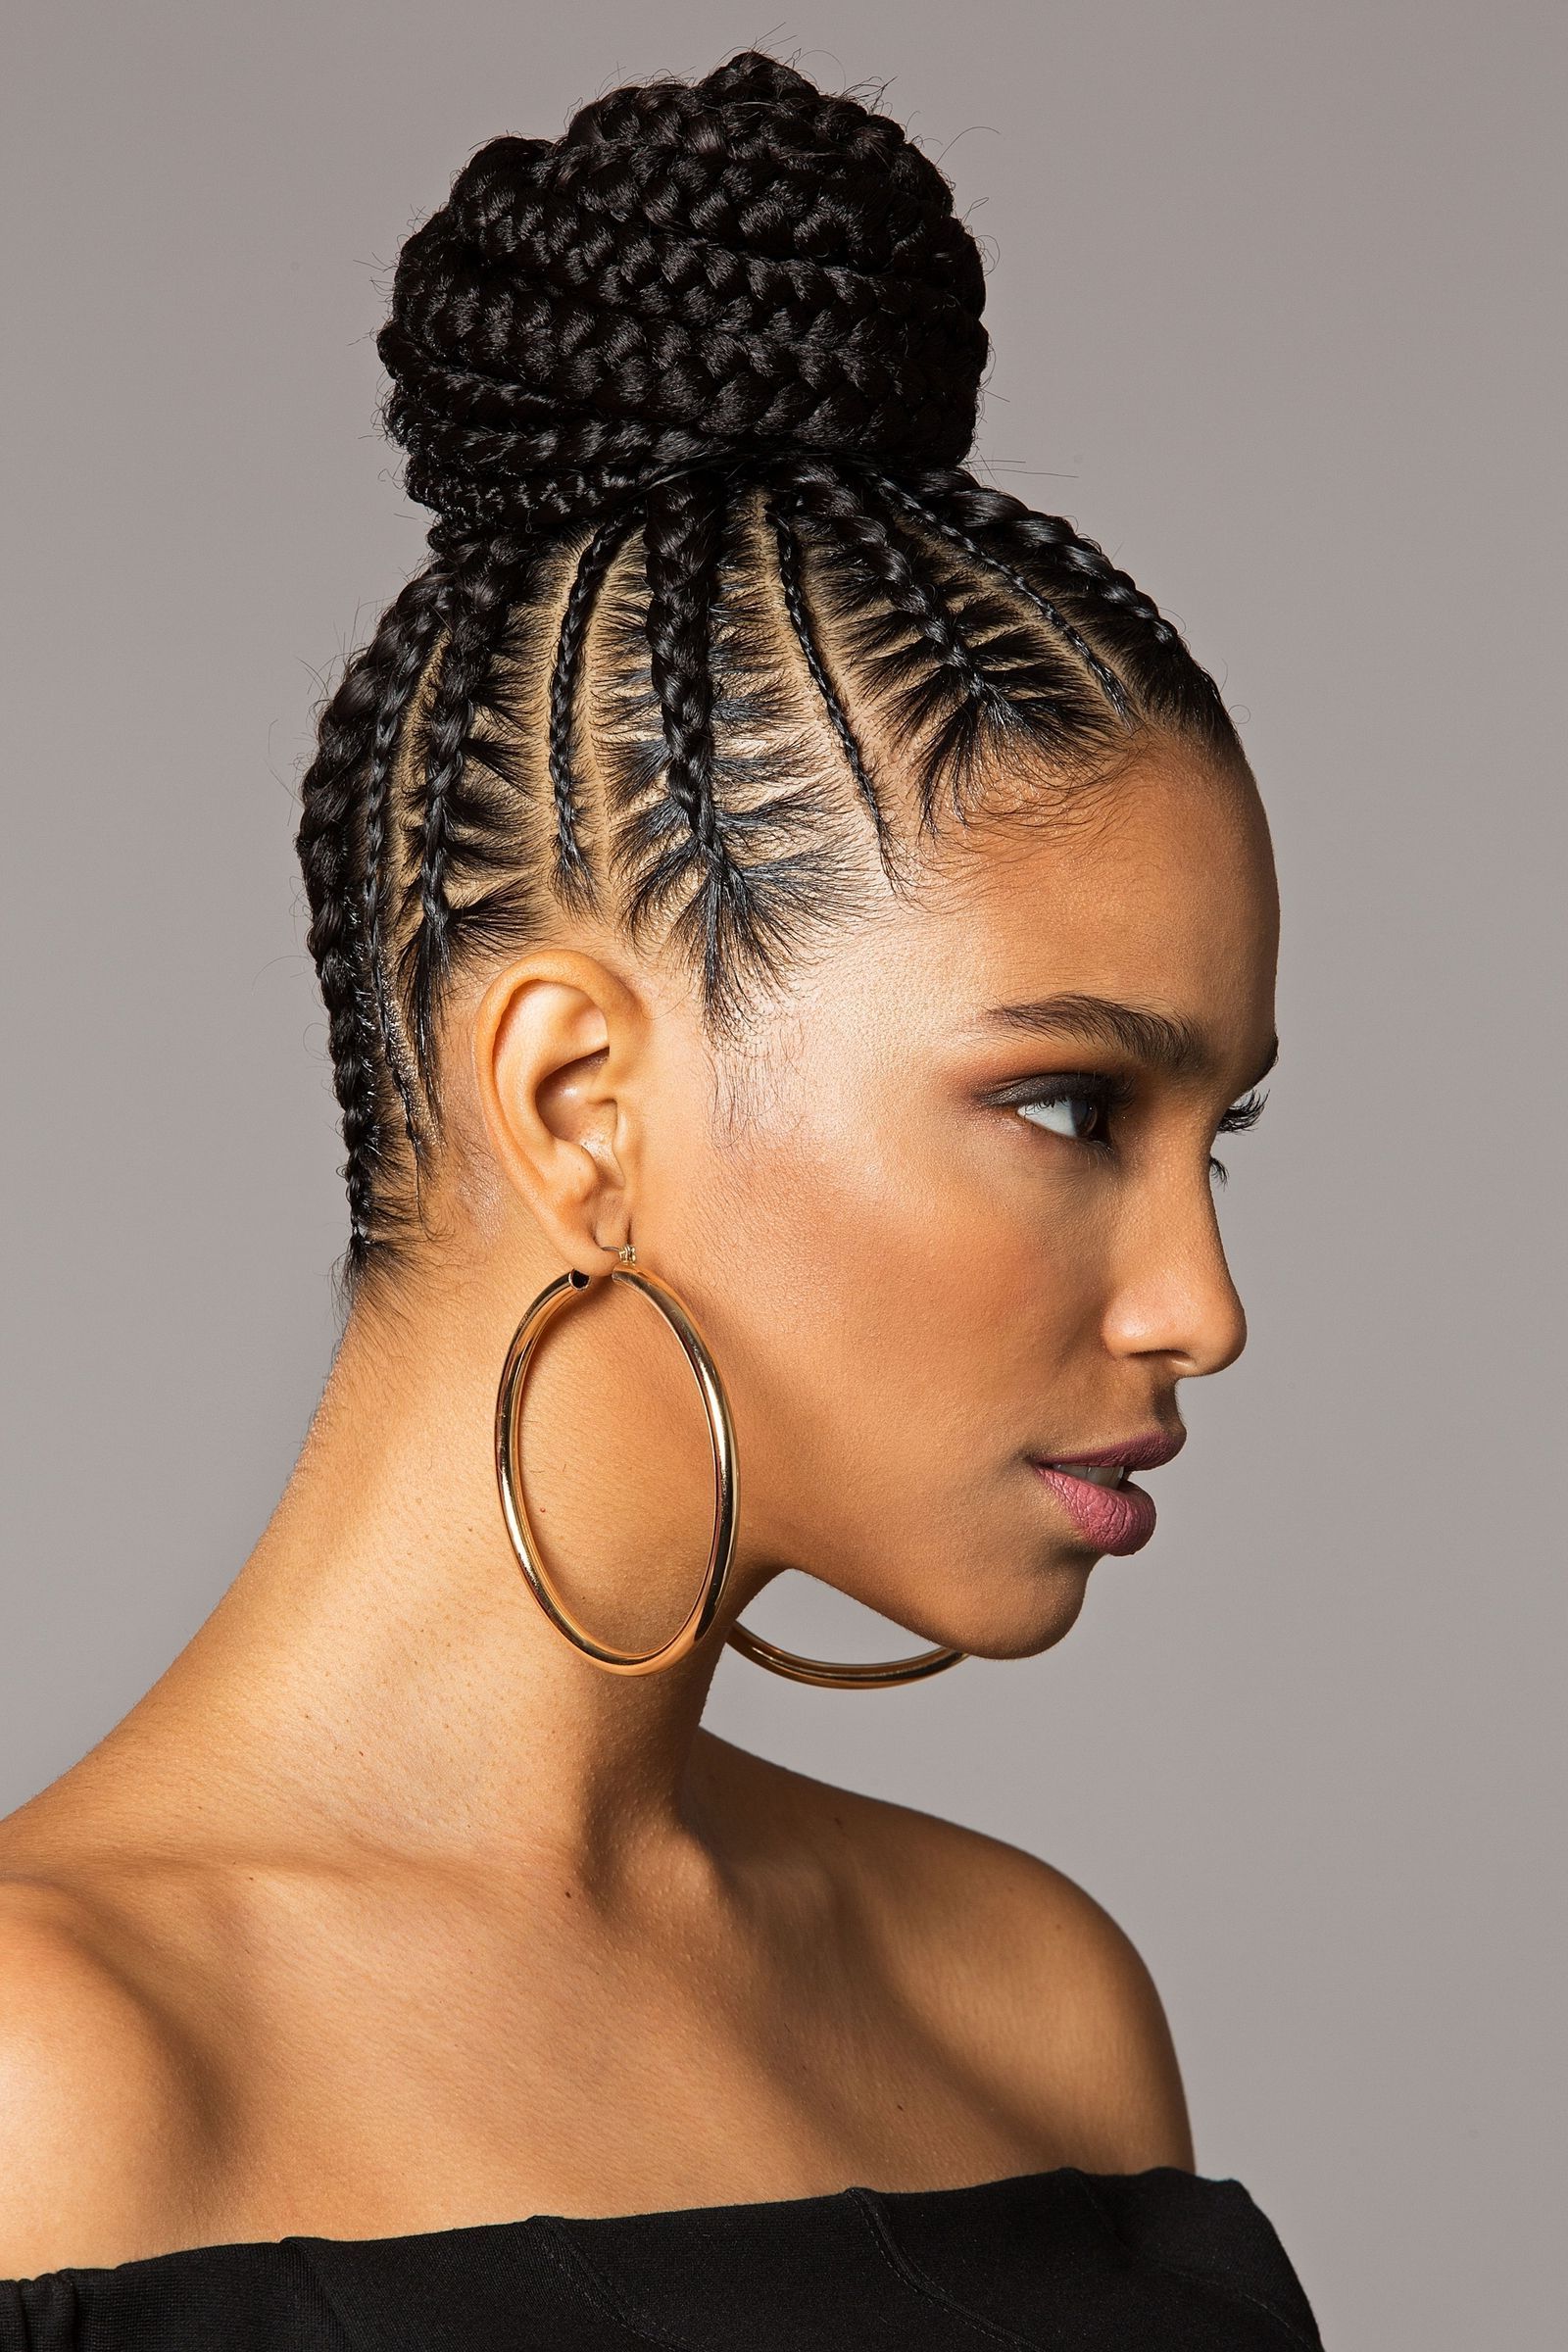 Before You Braid: 5 Steps To Prepare Your Natural Hair For A Intended For Popular Tight Green Boxer Yarn Braid Hairstyles (View 9 of 20)